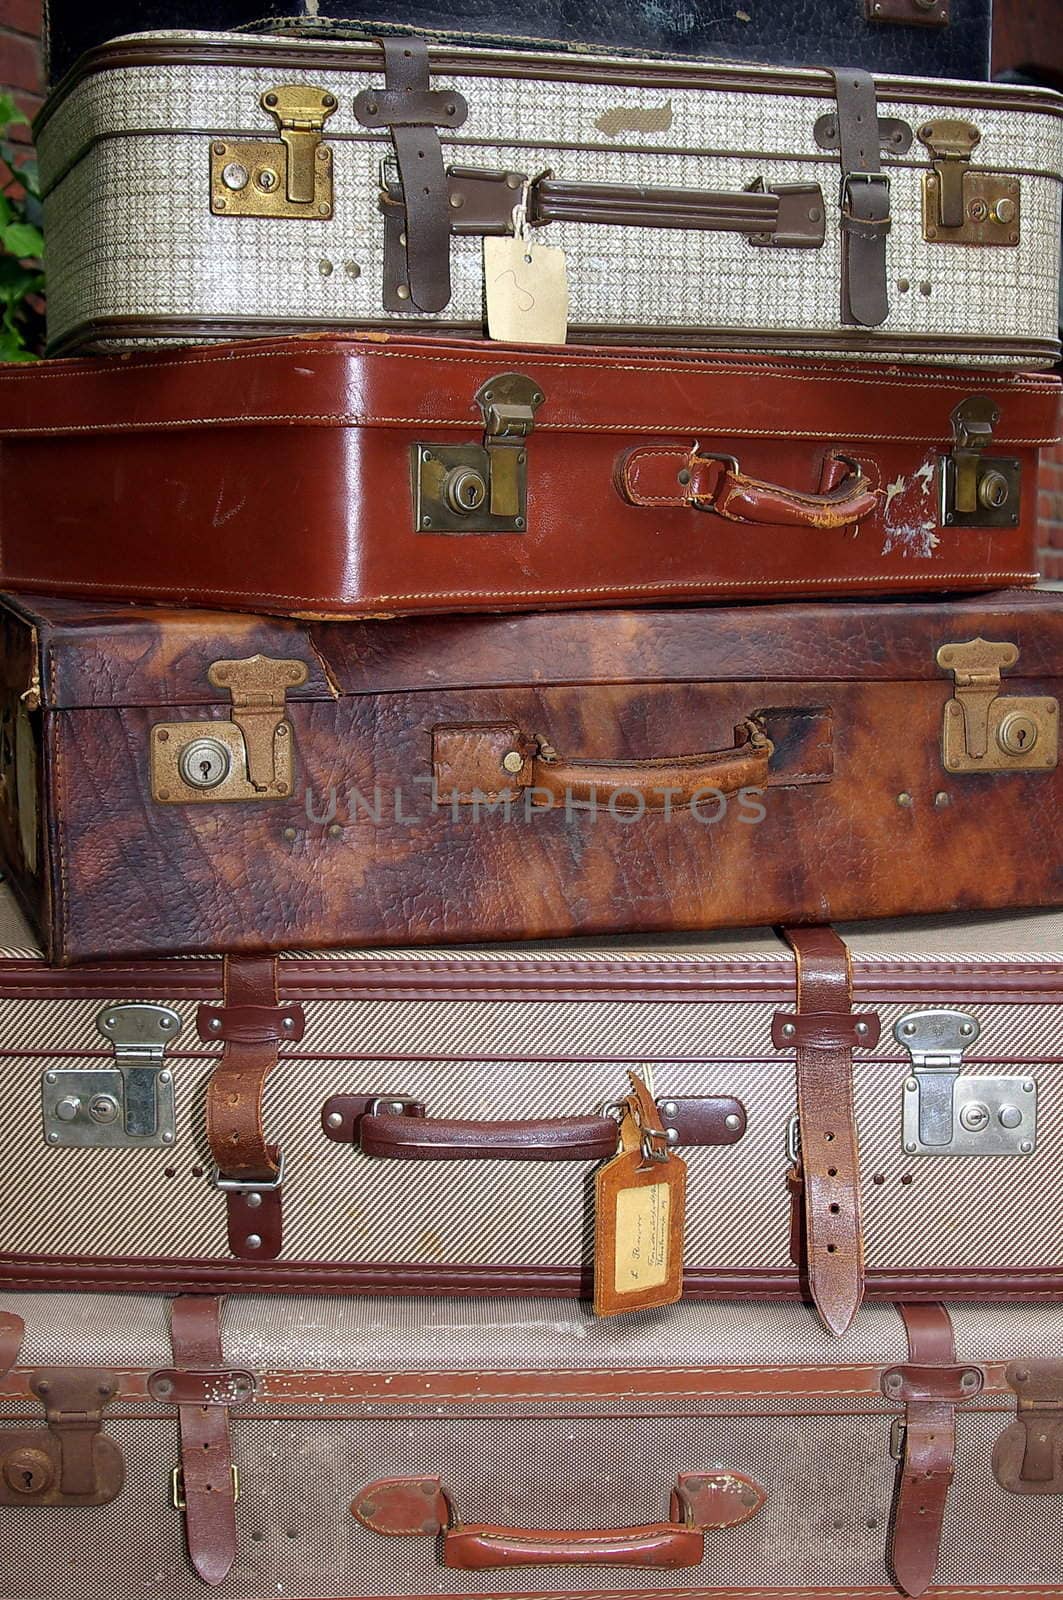  Old Suit-cases by FotoFrank